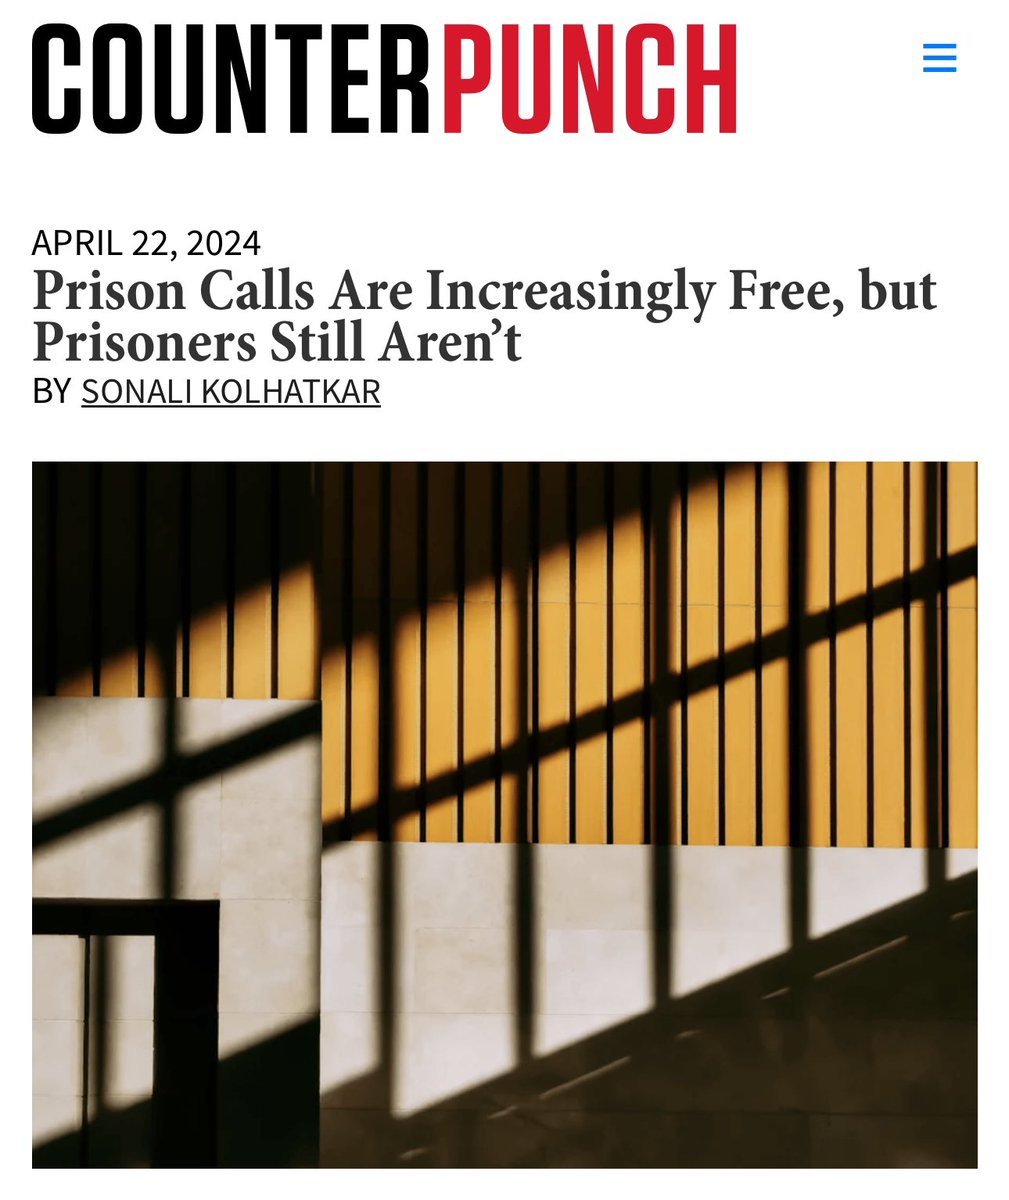 “More than 4,100 corporations extract money from imprisoned people and their loved ones, exploiting a community held hostage by the prison industrial complex.” counterpunch.org/2024/04/22/pri…